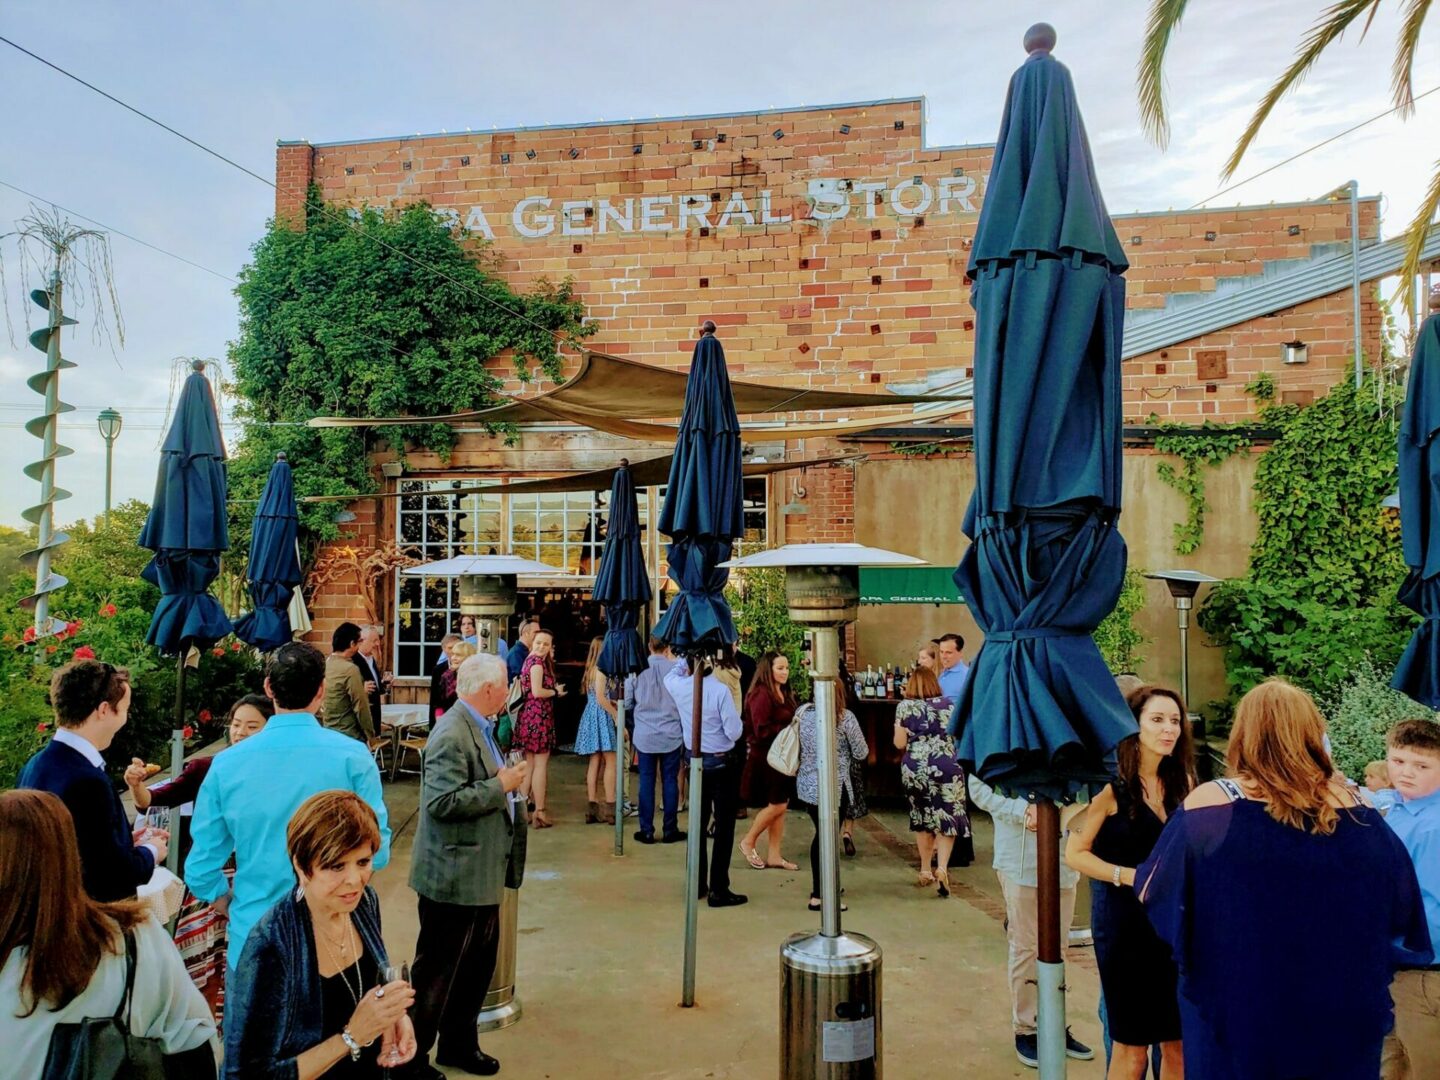 Exterior shot of Napa General Store and customers enjoying the outdoor patio